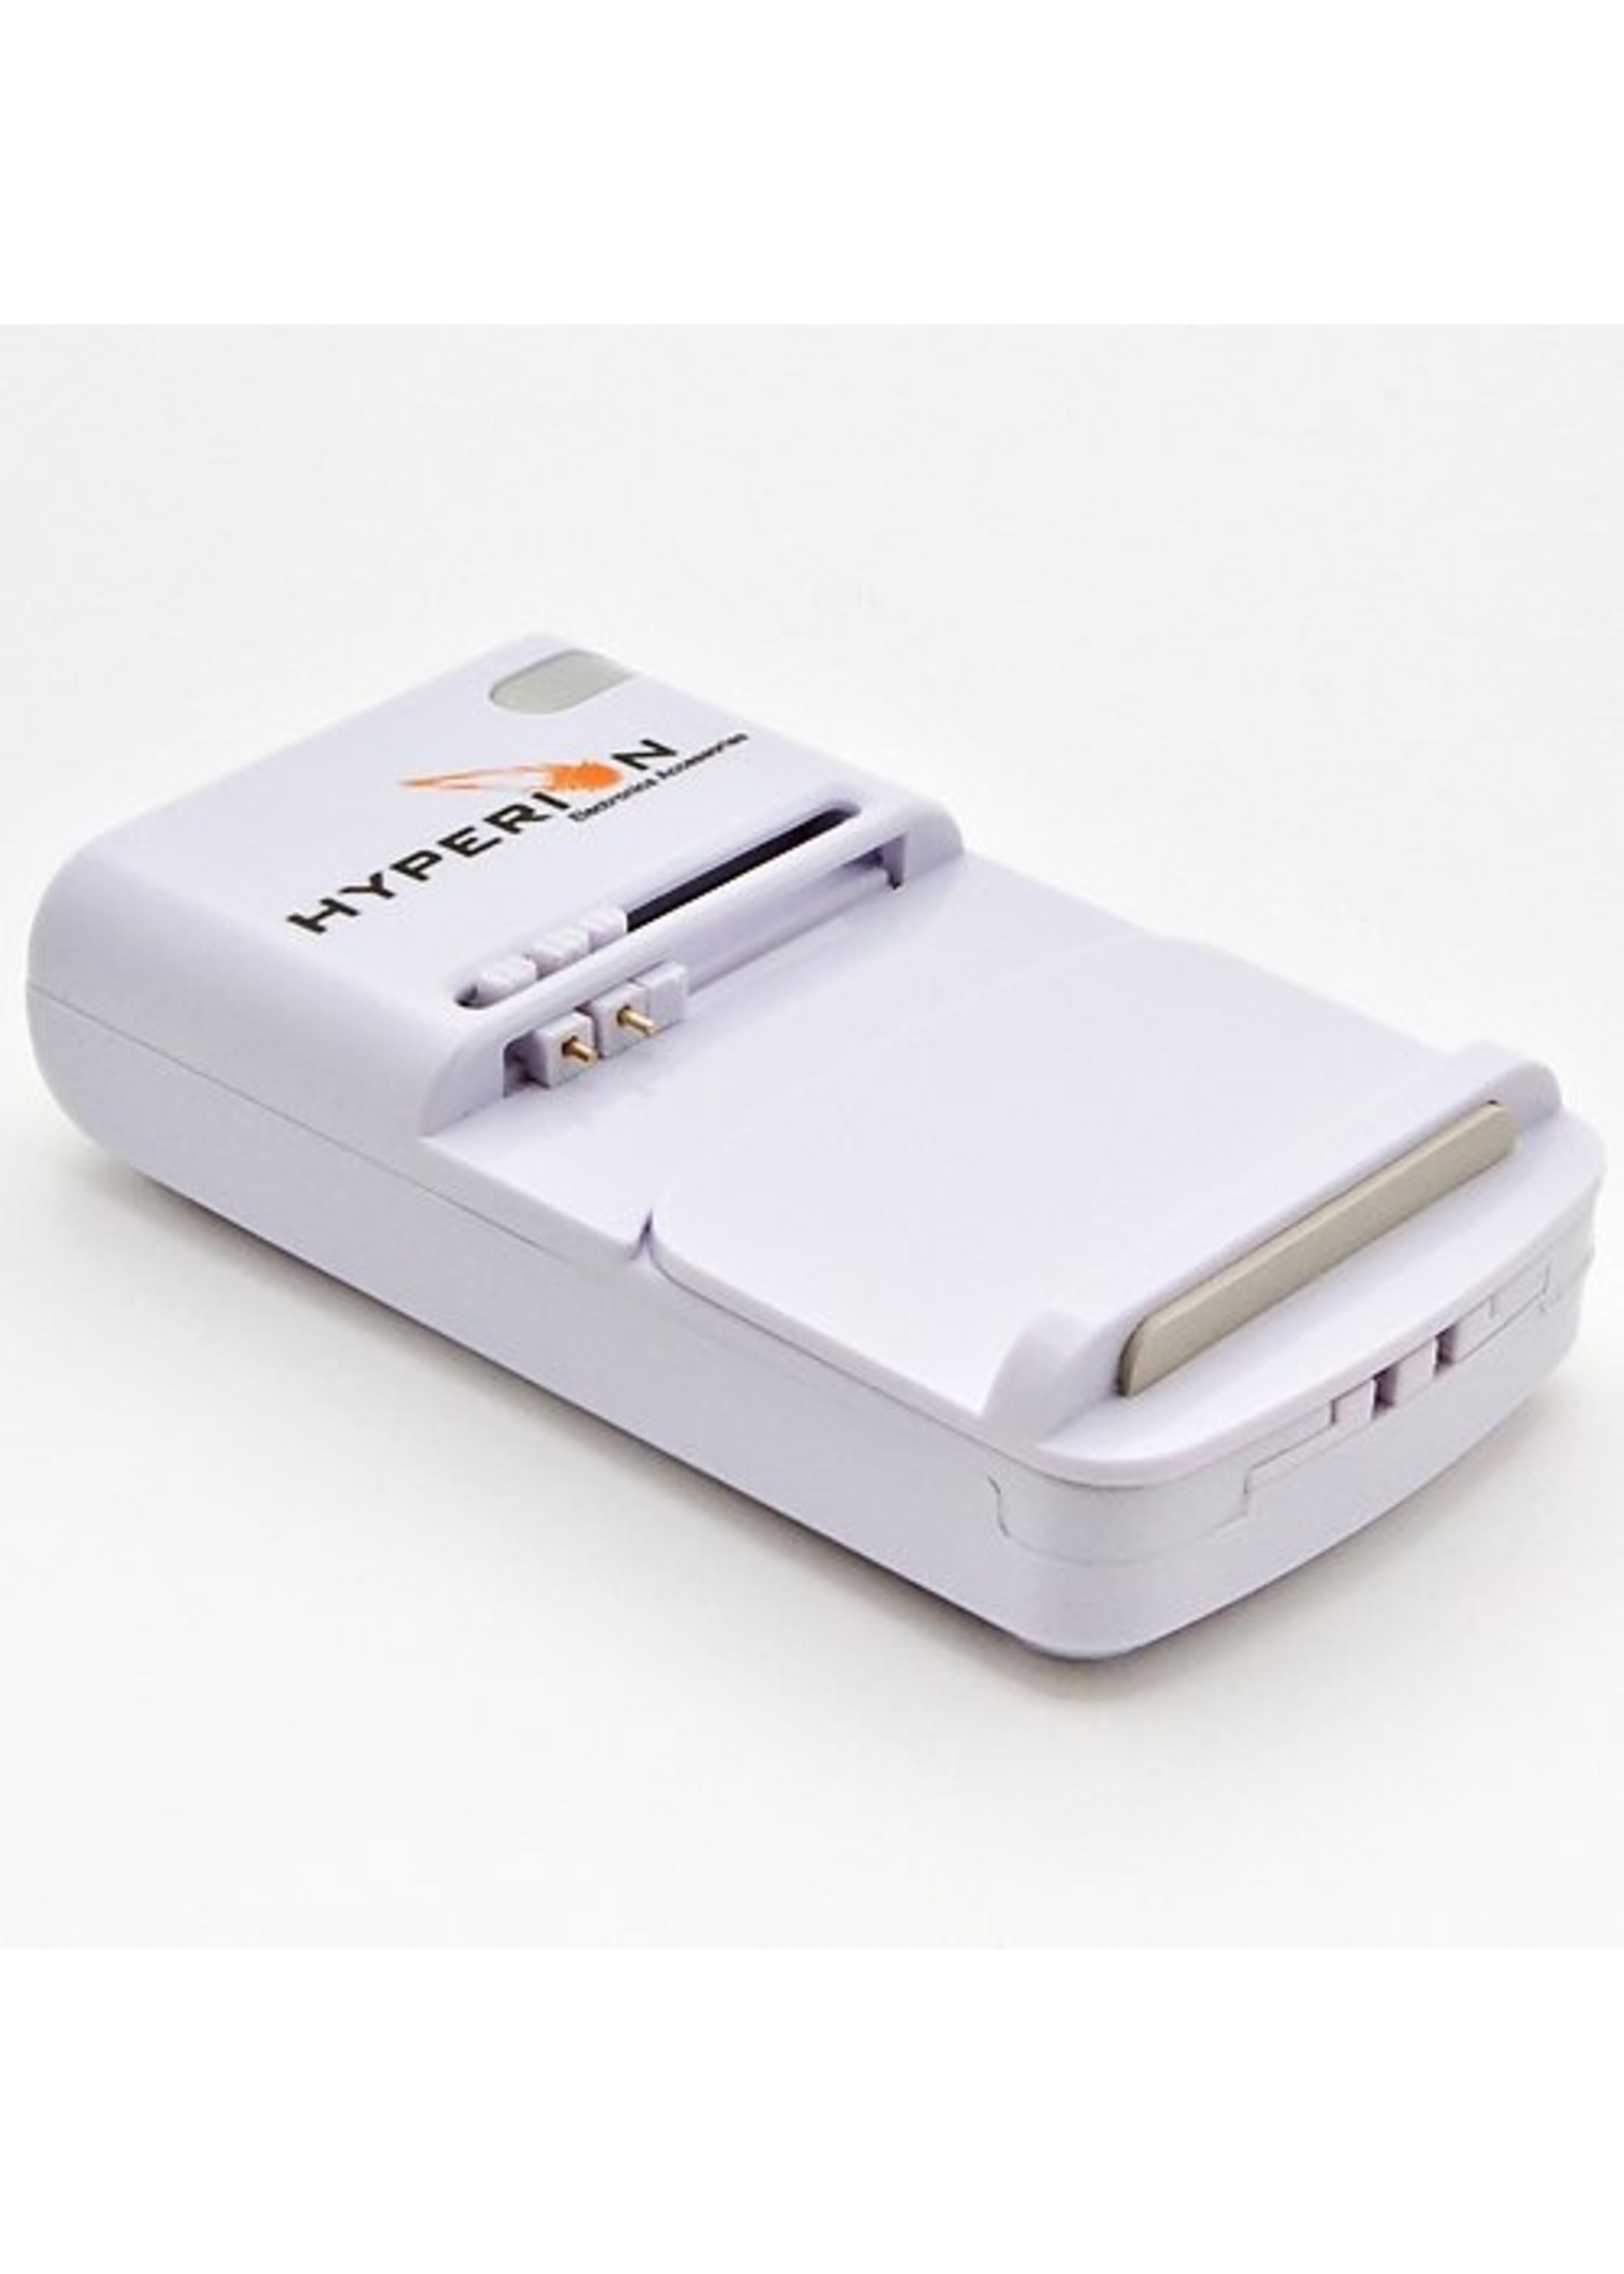 MAX 5 Universal Battery Charger